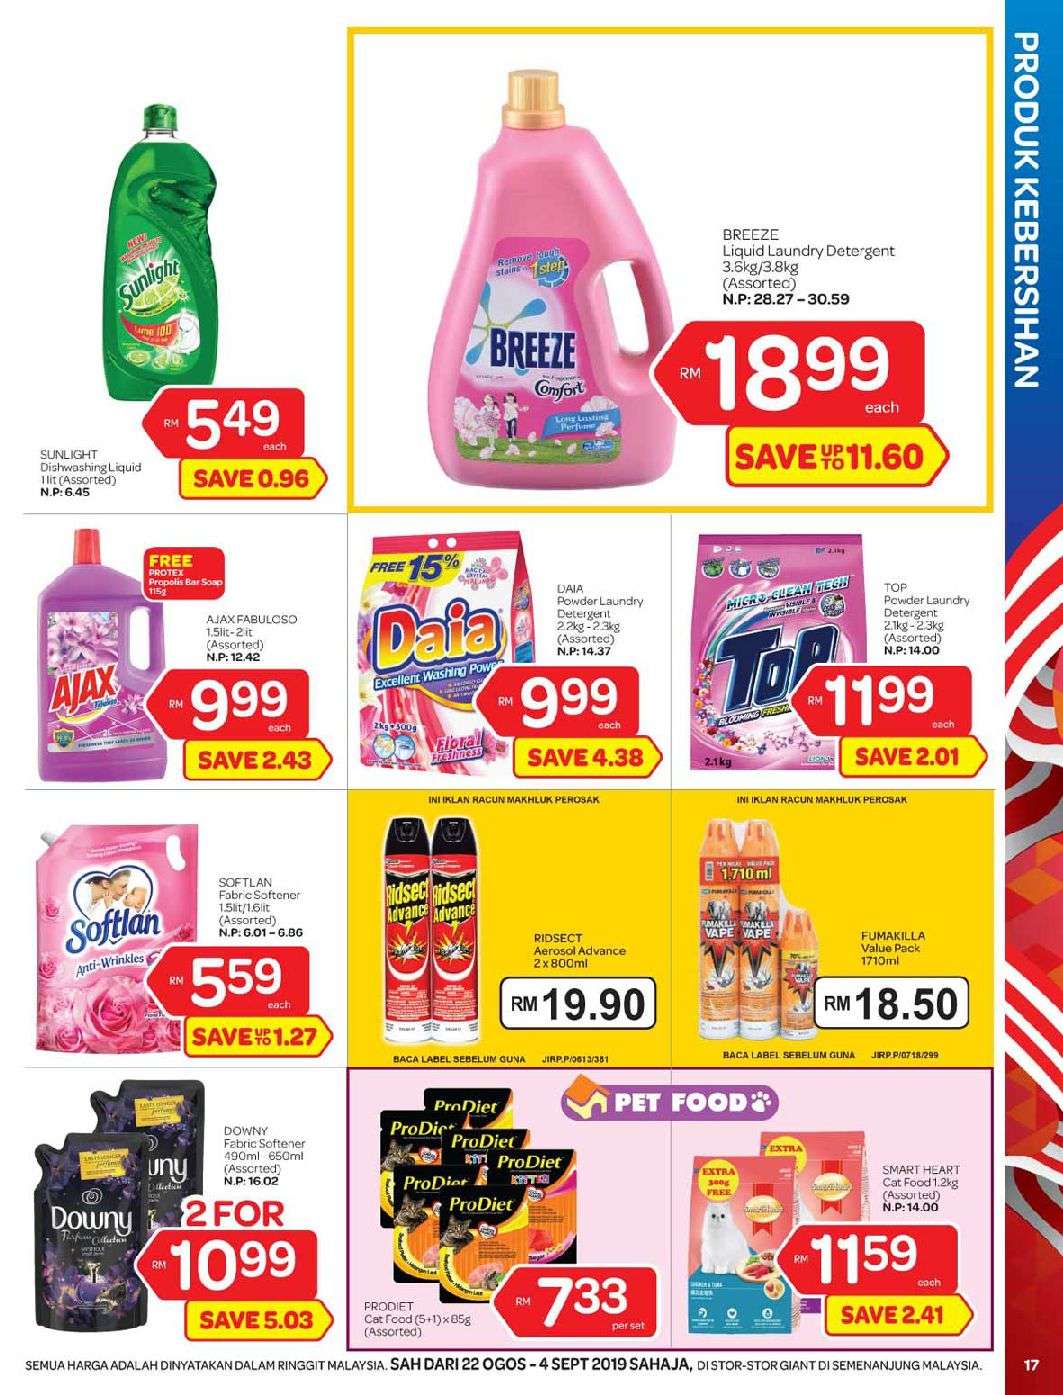 Giant Catalogue (22 August 2019 - 4 September 2019)